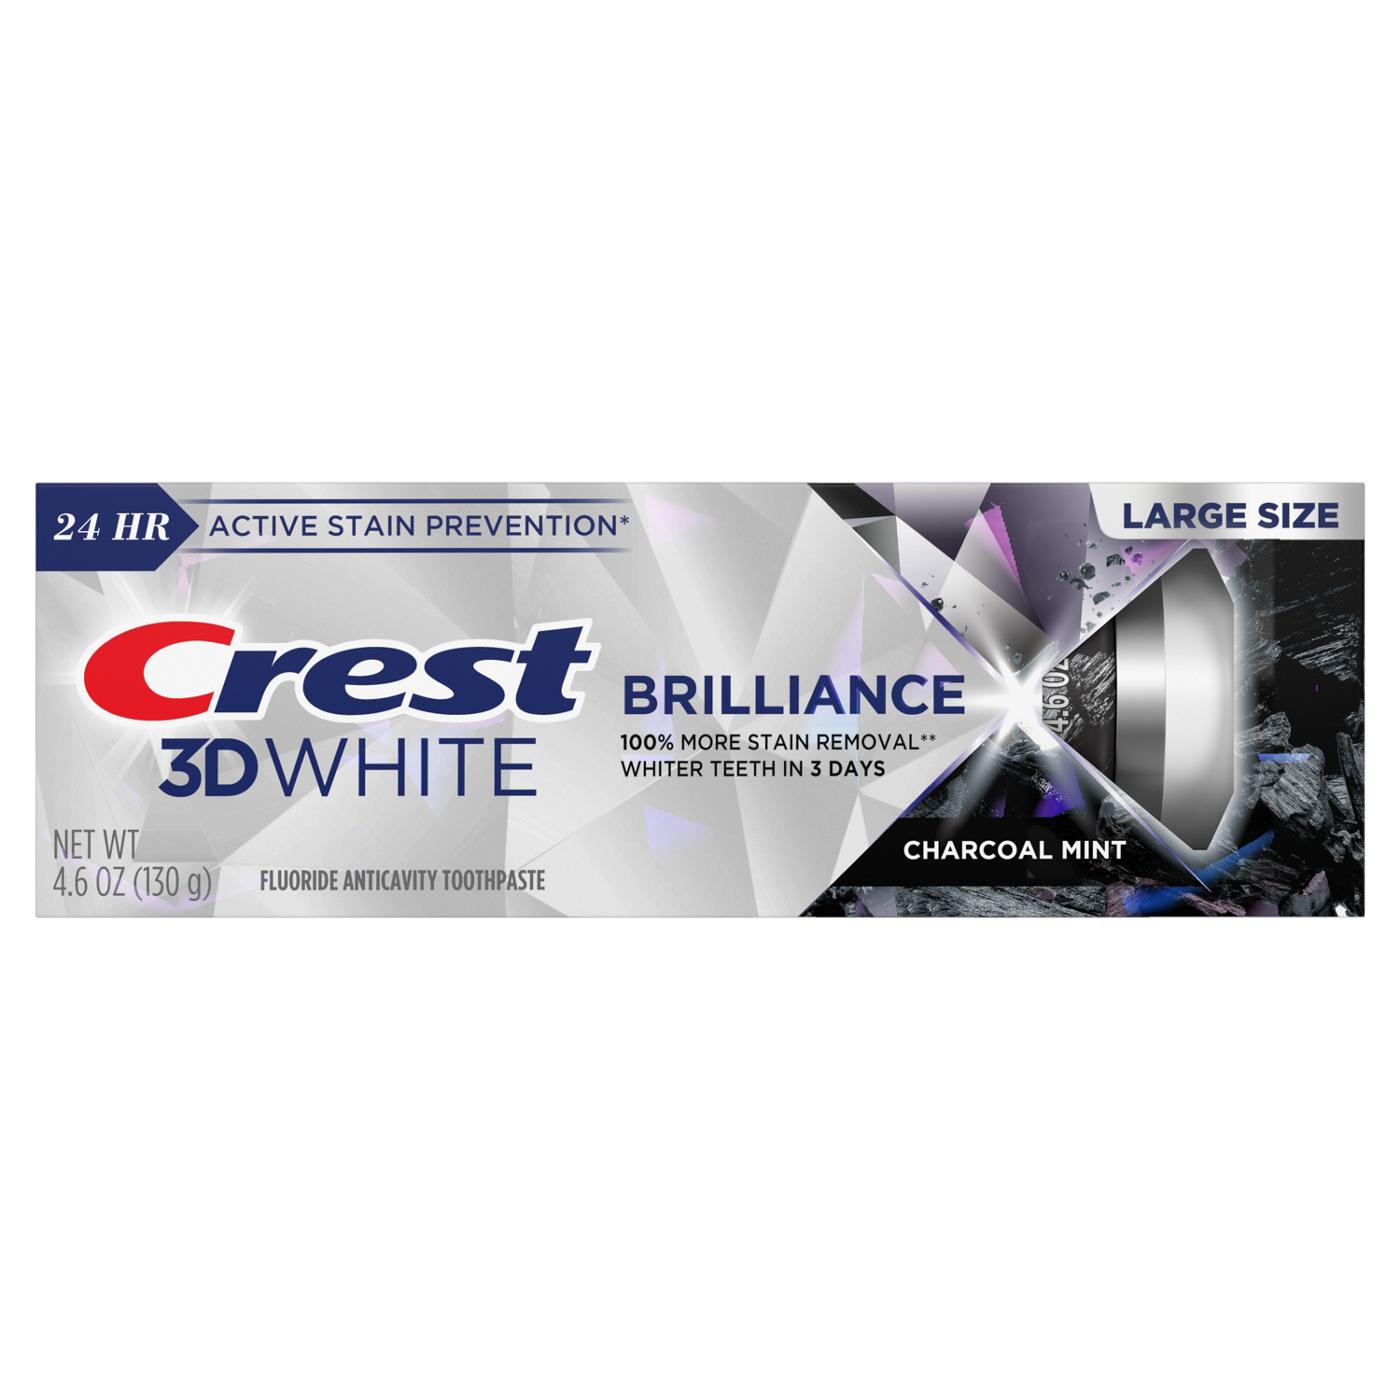 Crest 3D White Brilliance Toothpaste - Charcoal Mint ; image 1 of 7